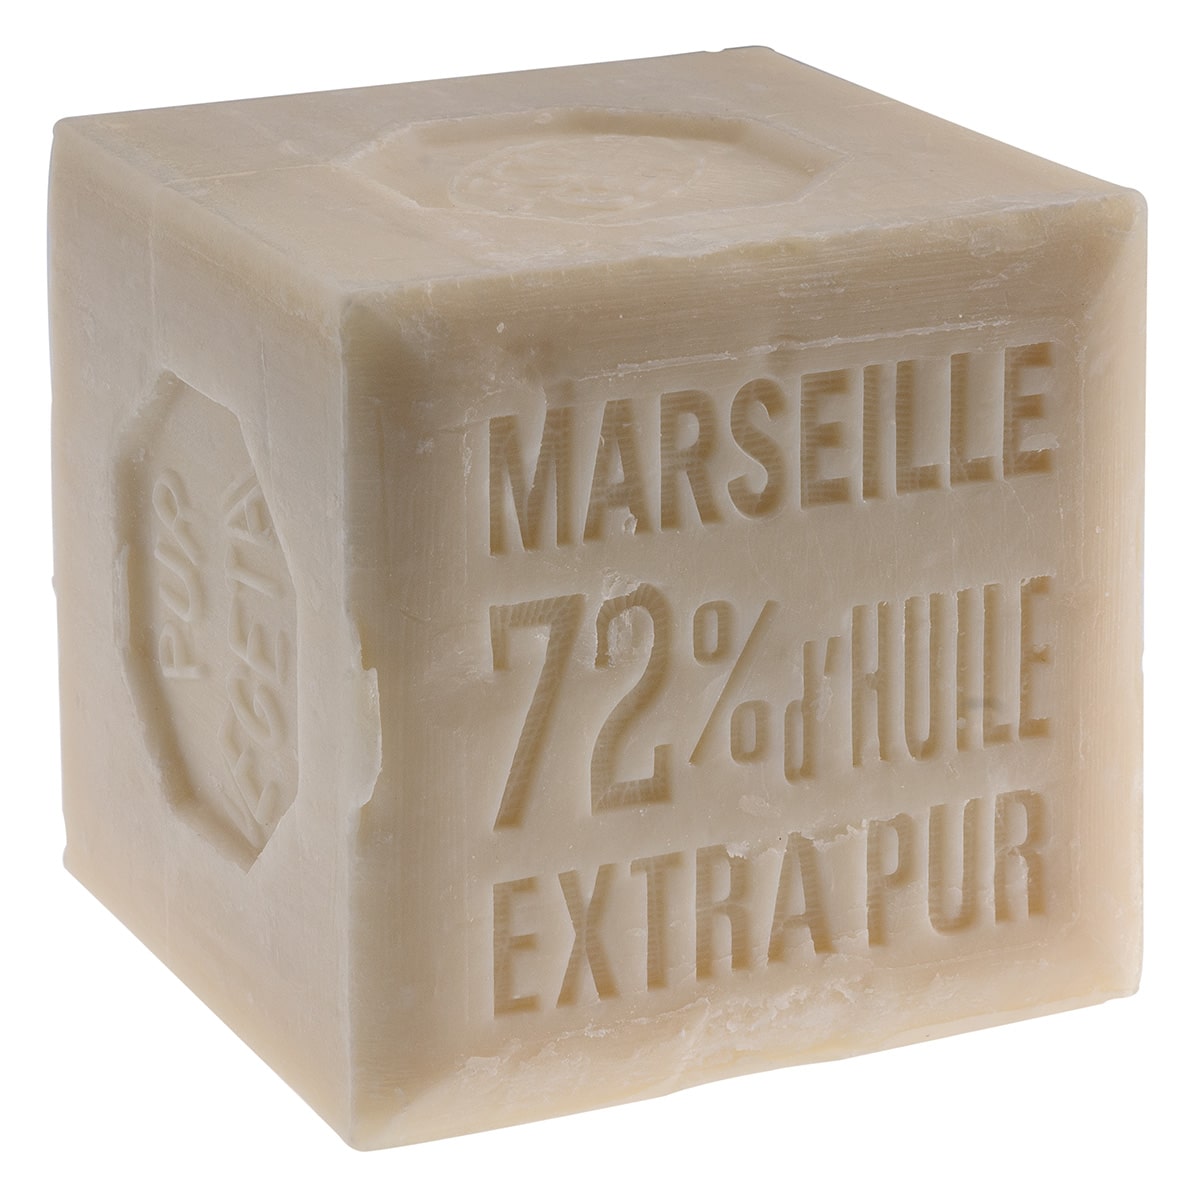 Marseille soap cube with vegetable oils 600g - Cosmos Natural